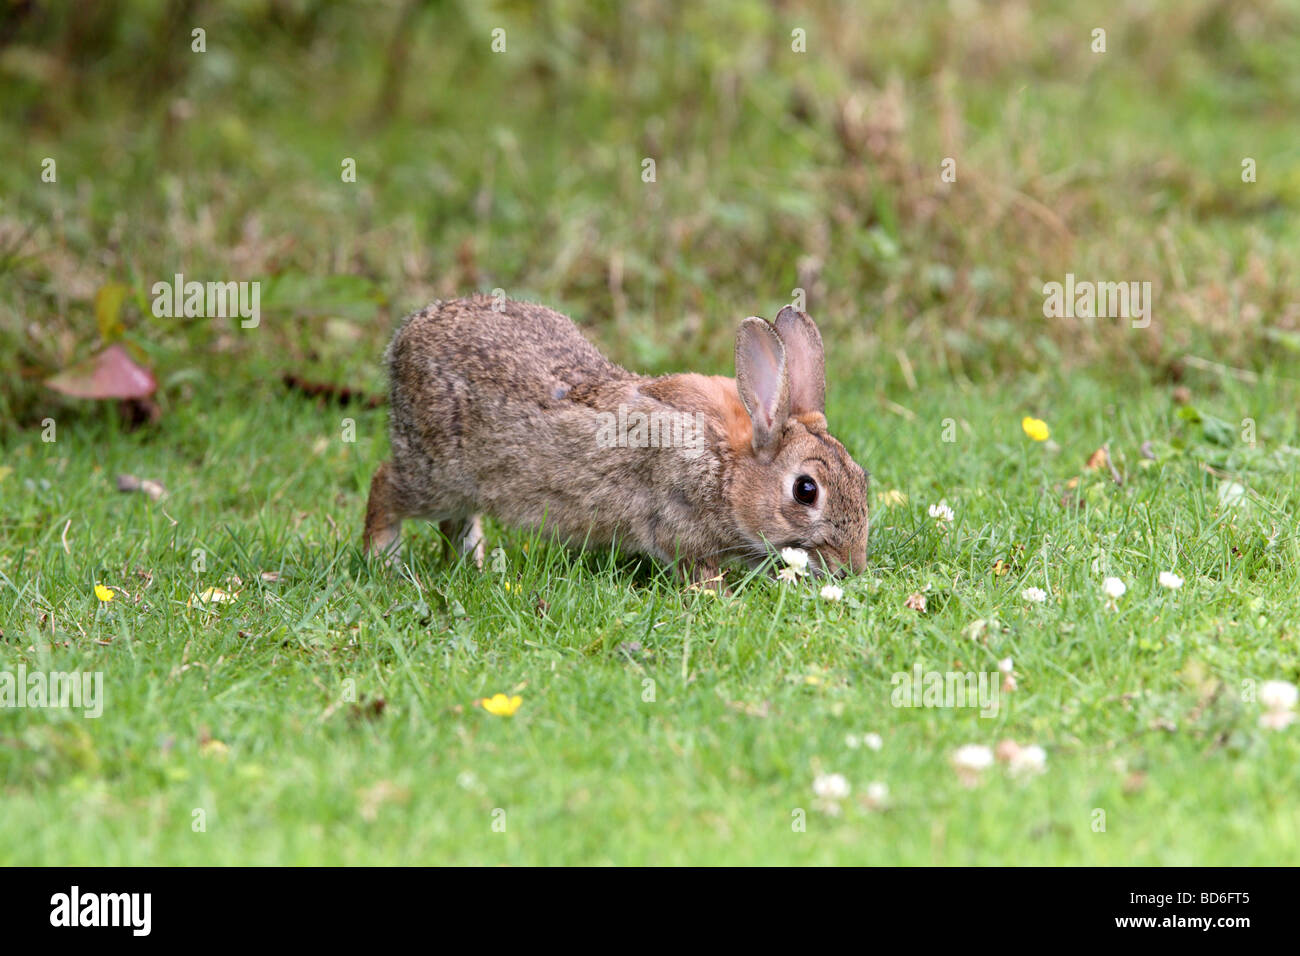 Young Rabbit - Oryctolagus cuniculus nibbling Grass Stock Photo